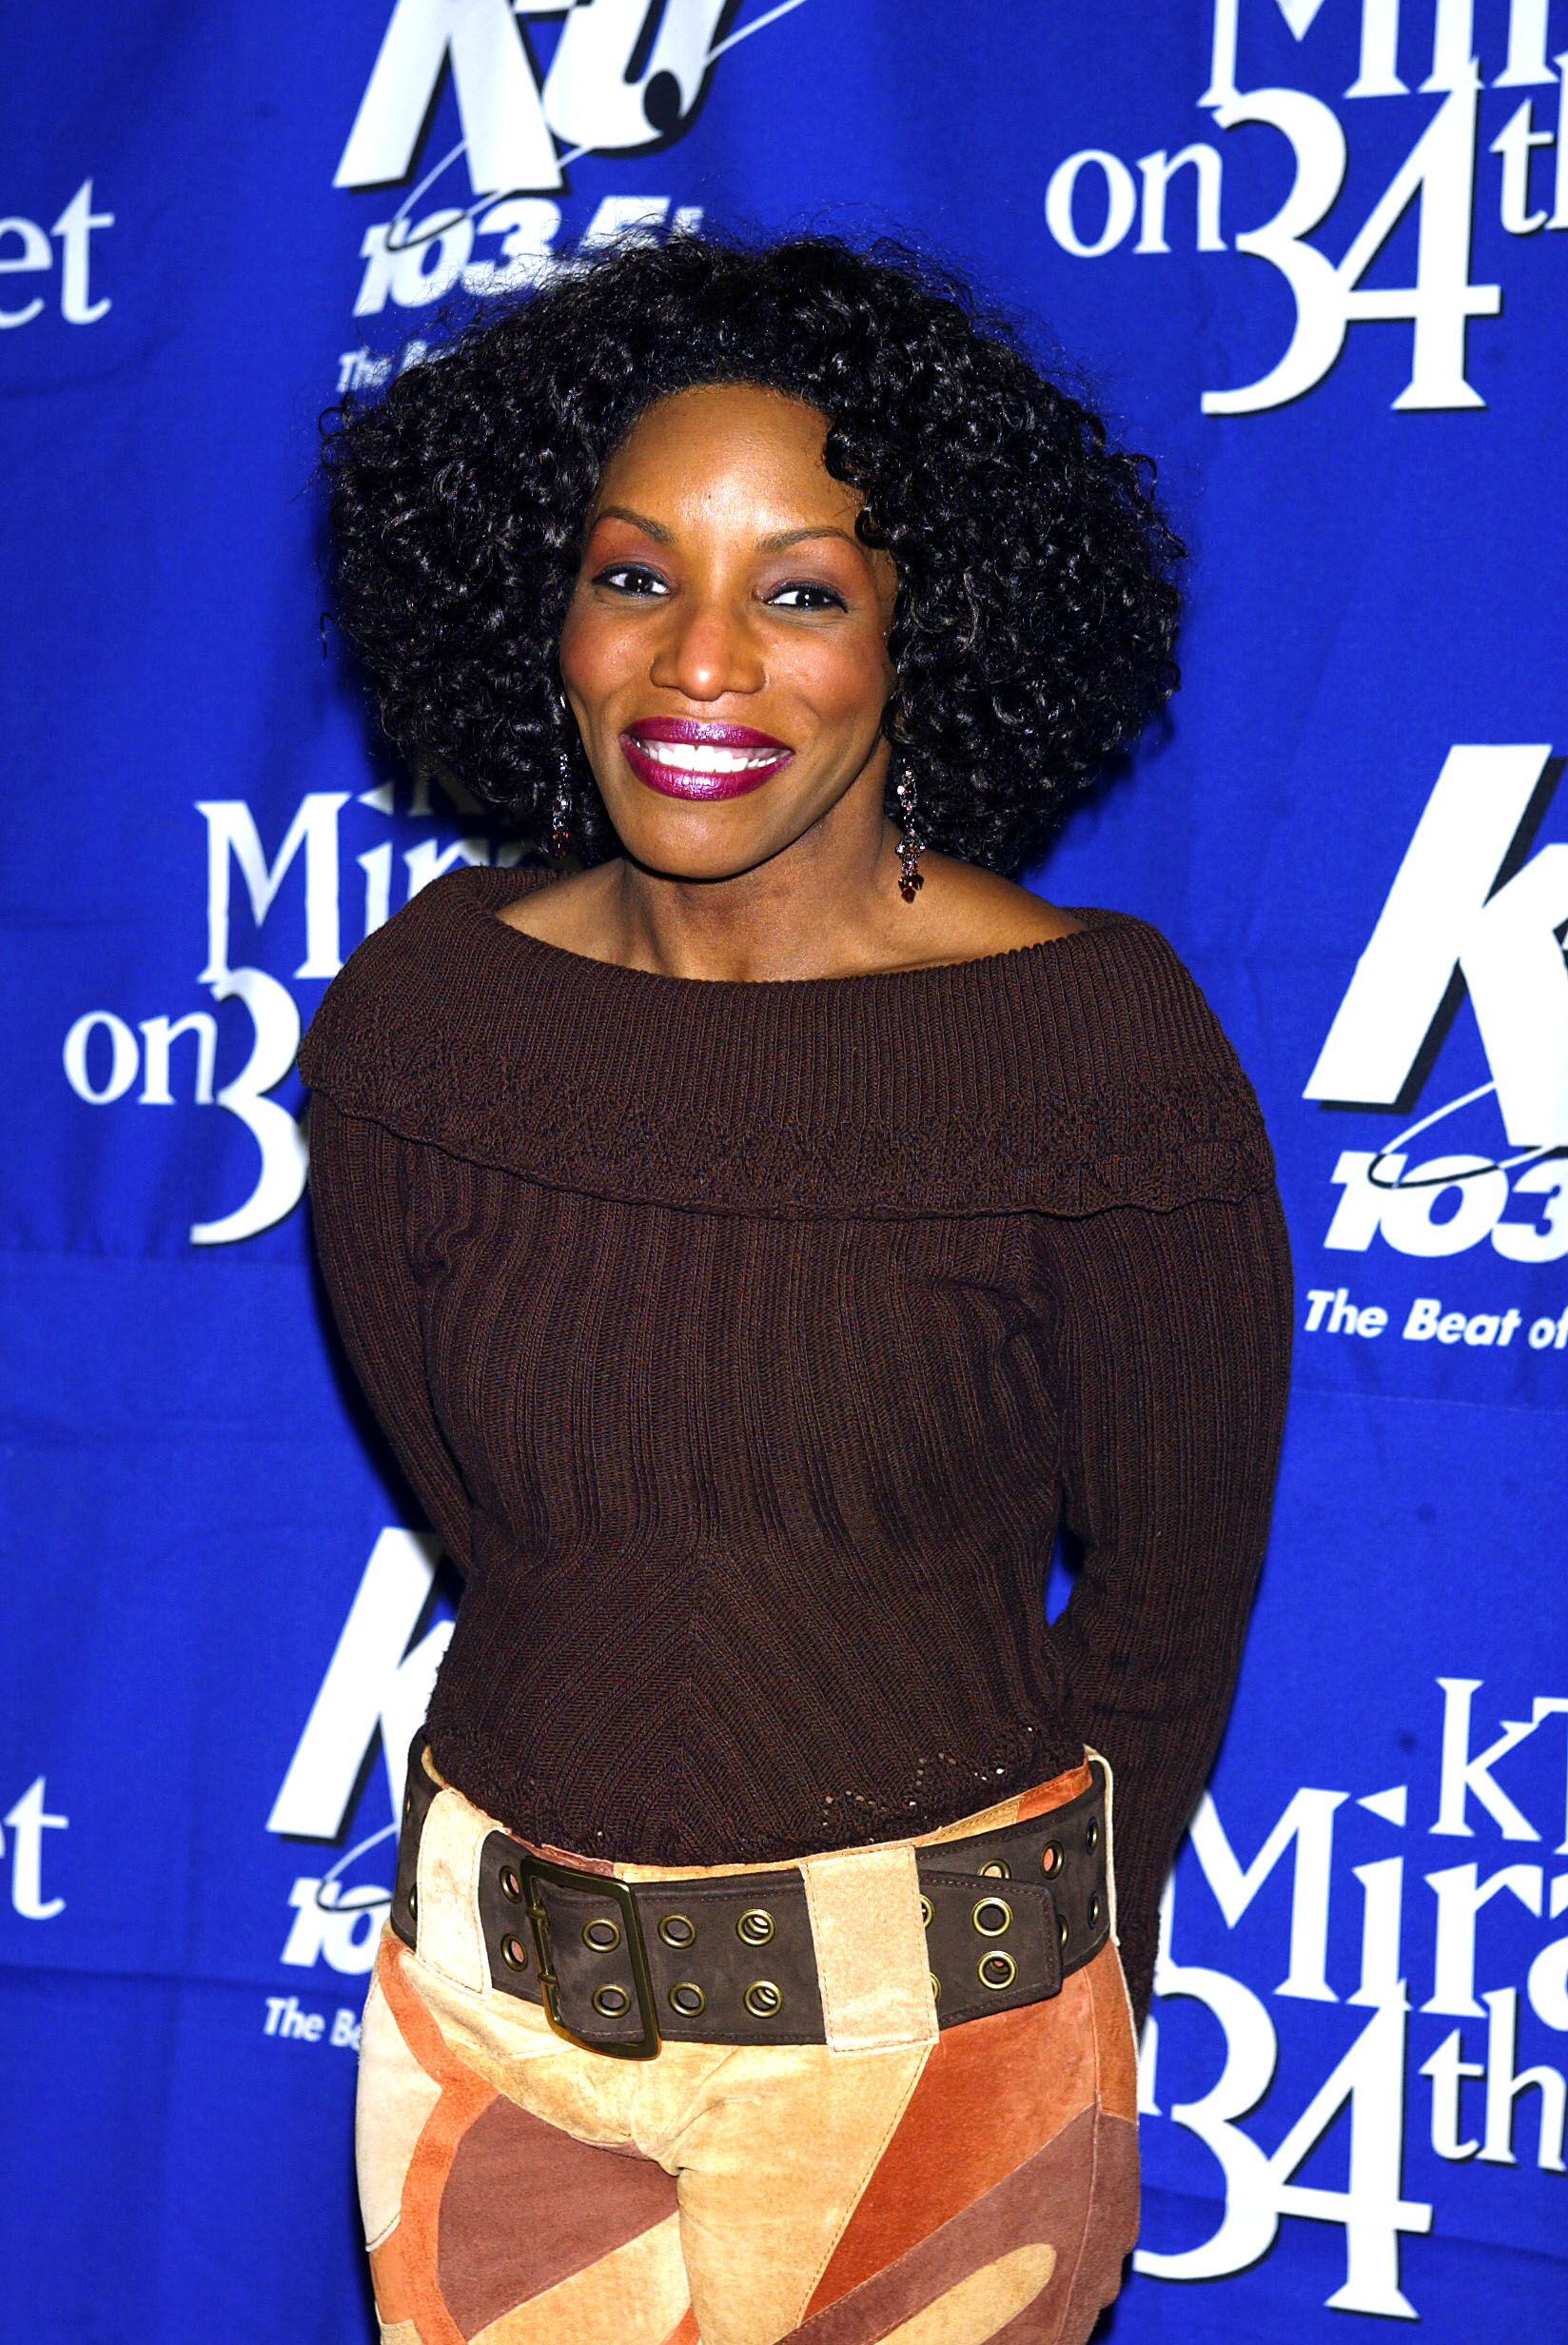 Stephanie Mills backstage during KTU's "Miracle on 34th Street" holiday concert in New York City. December 18, 2002 | Source: Getty Images